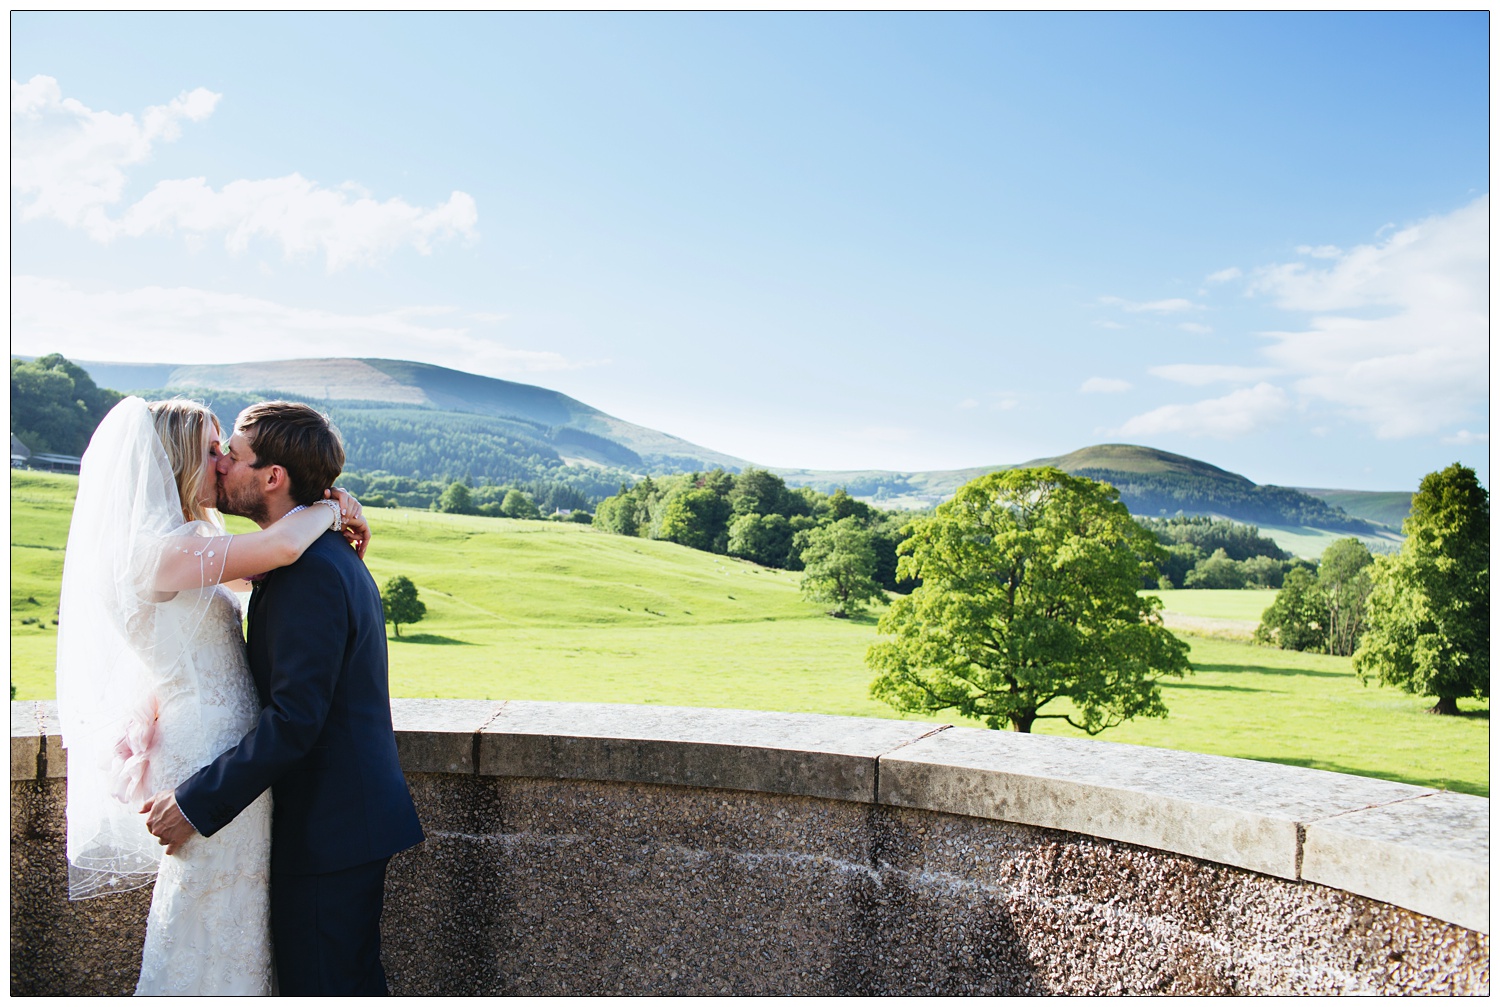 At the top of the Inn at Whitewell a couple kiss with the countryside in the distance.